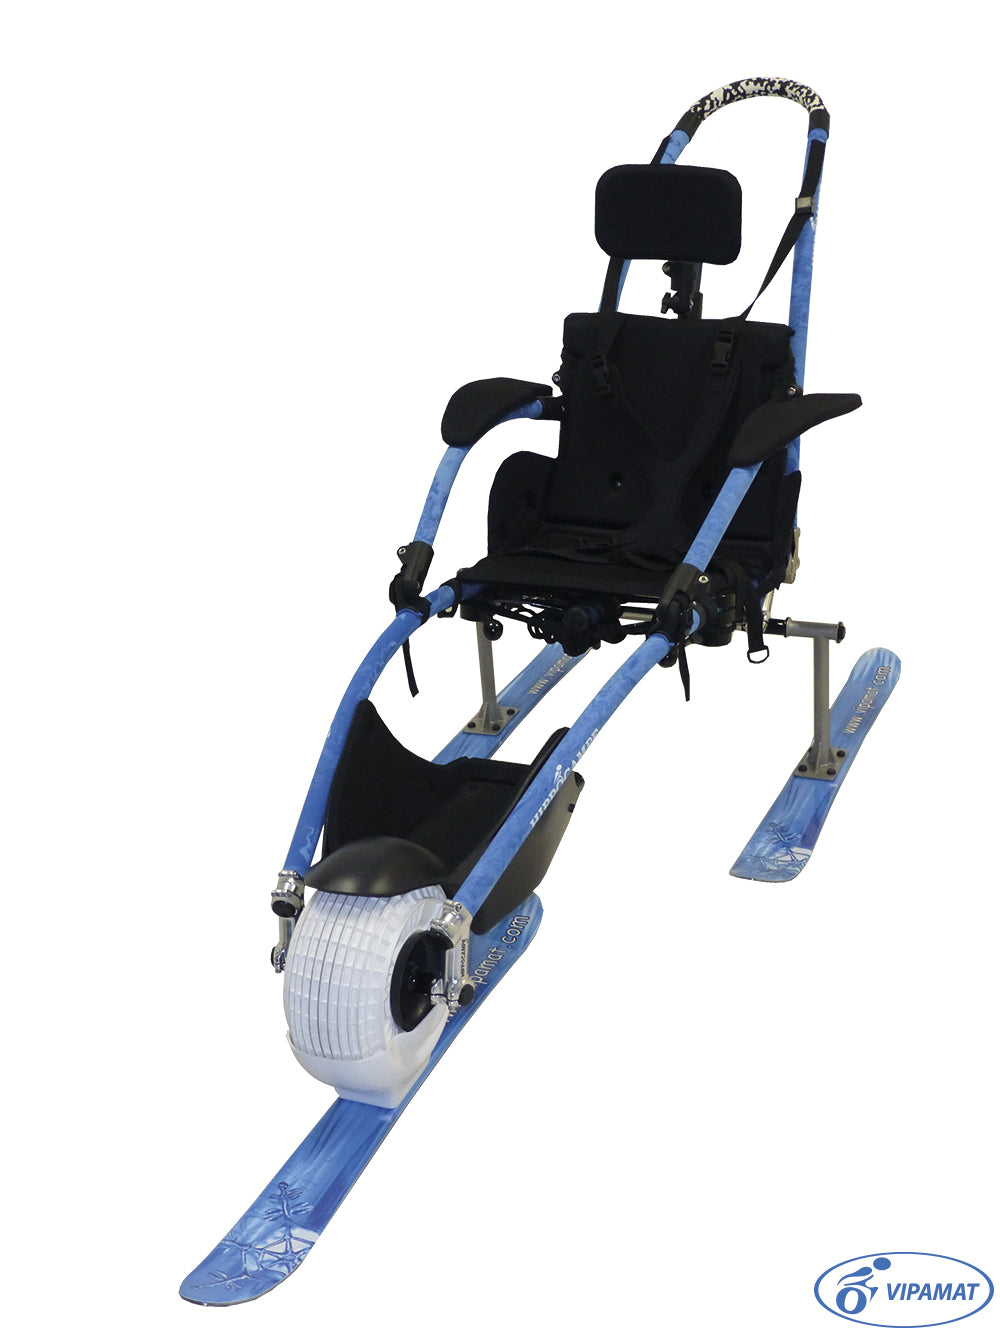 Beach and All-terrain Hippocampe Chair with skis